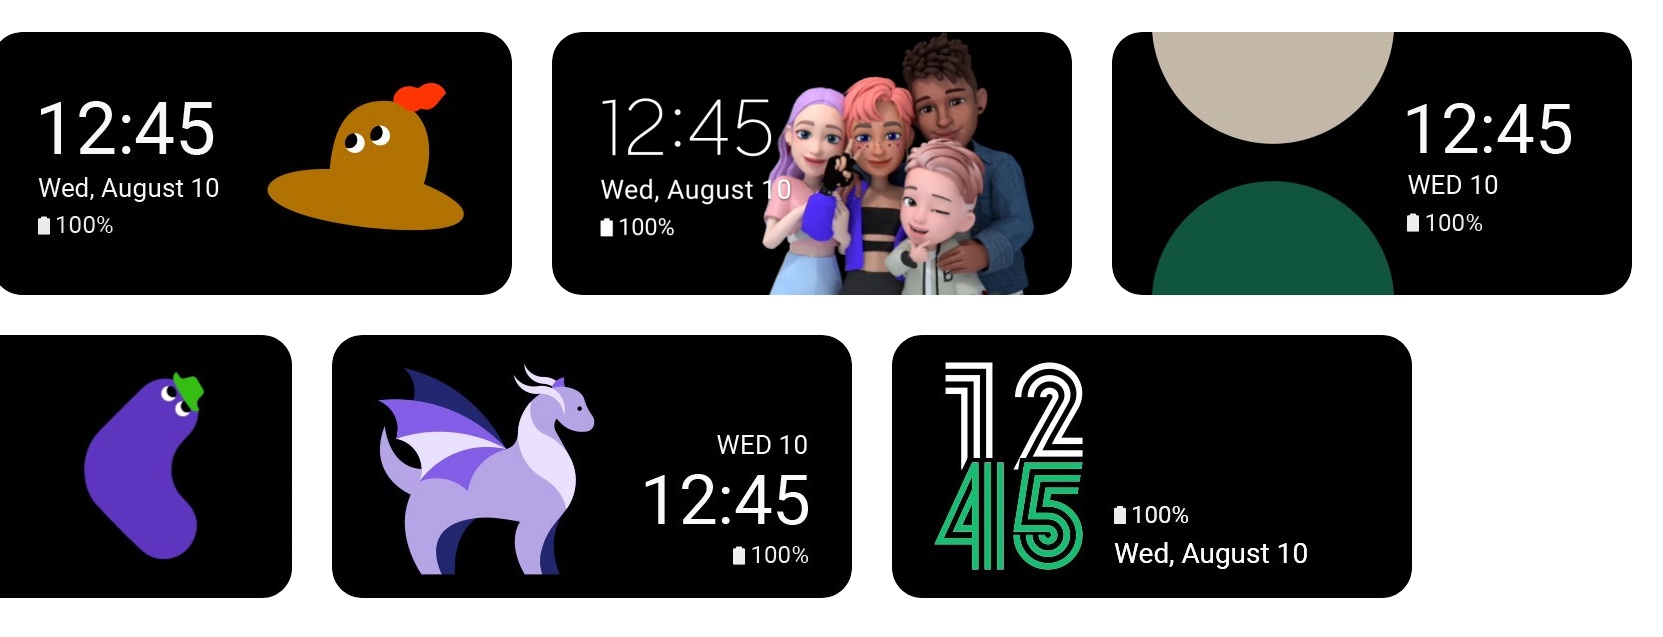 Various watch faces converge in a tile patten. Each watch face features a different graphic, and displays the
				time, date, and battery status. In the central watch face, four AR emoji-style animated characters pose close
				together as if taking a group photo.